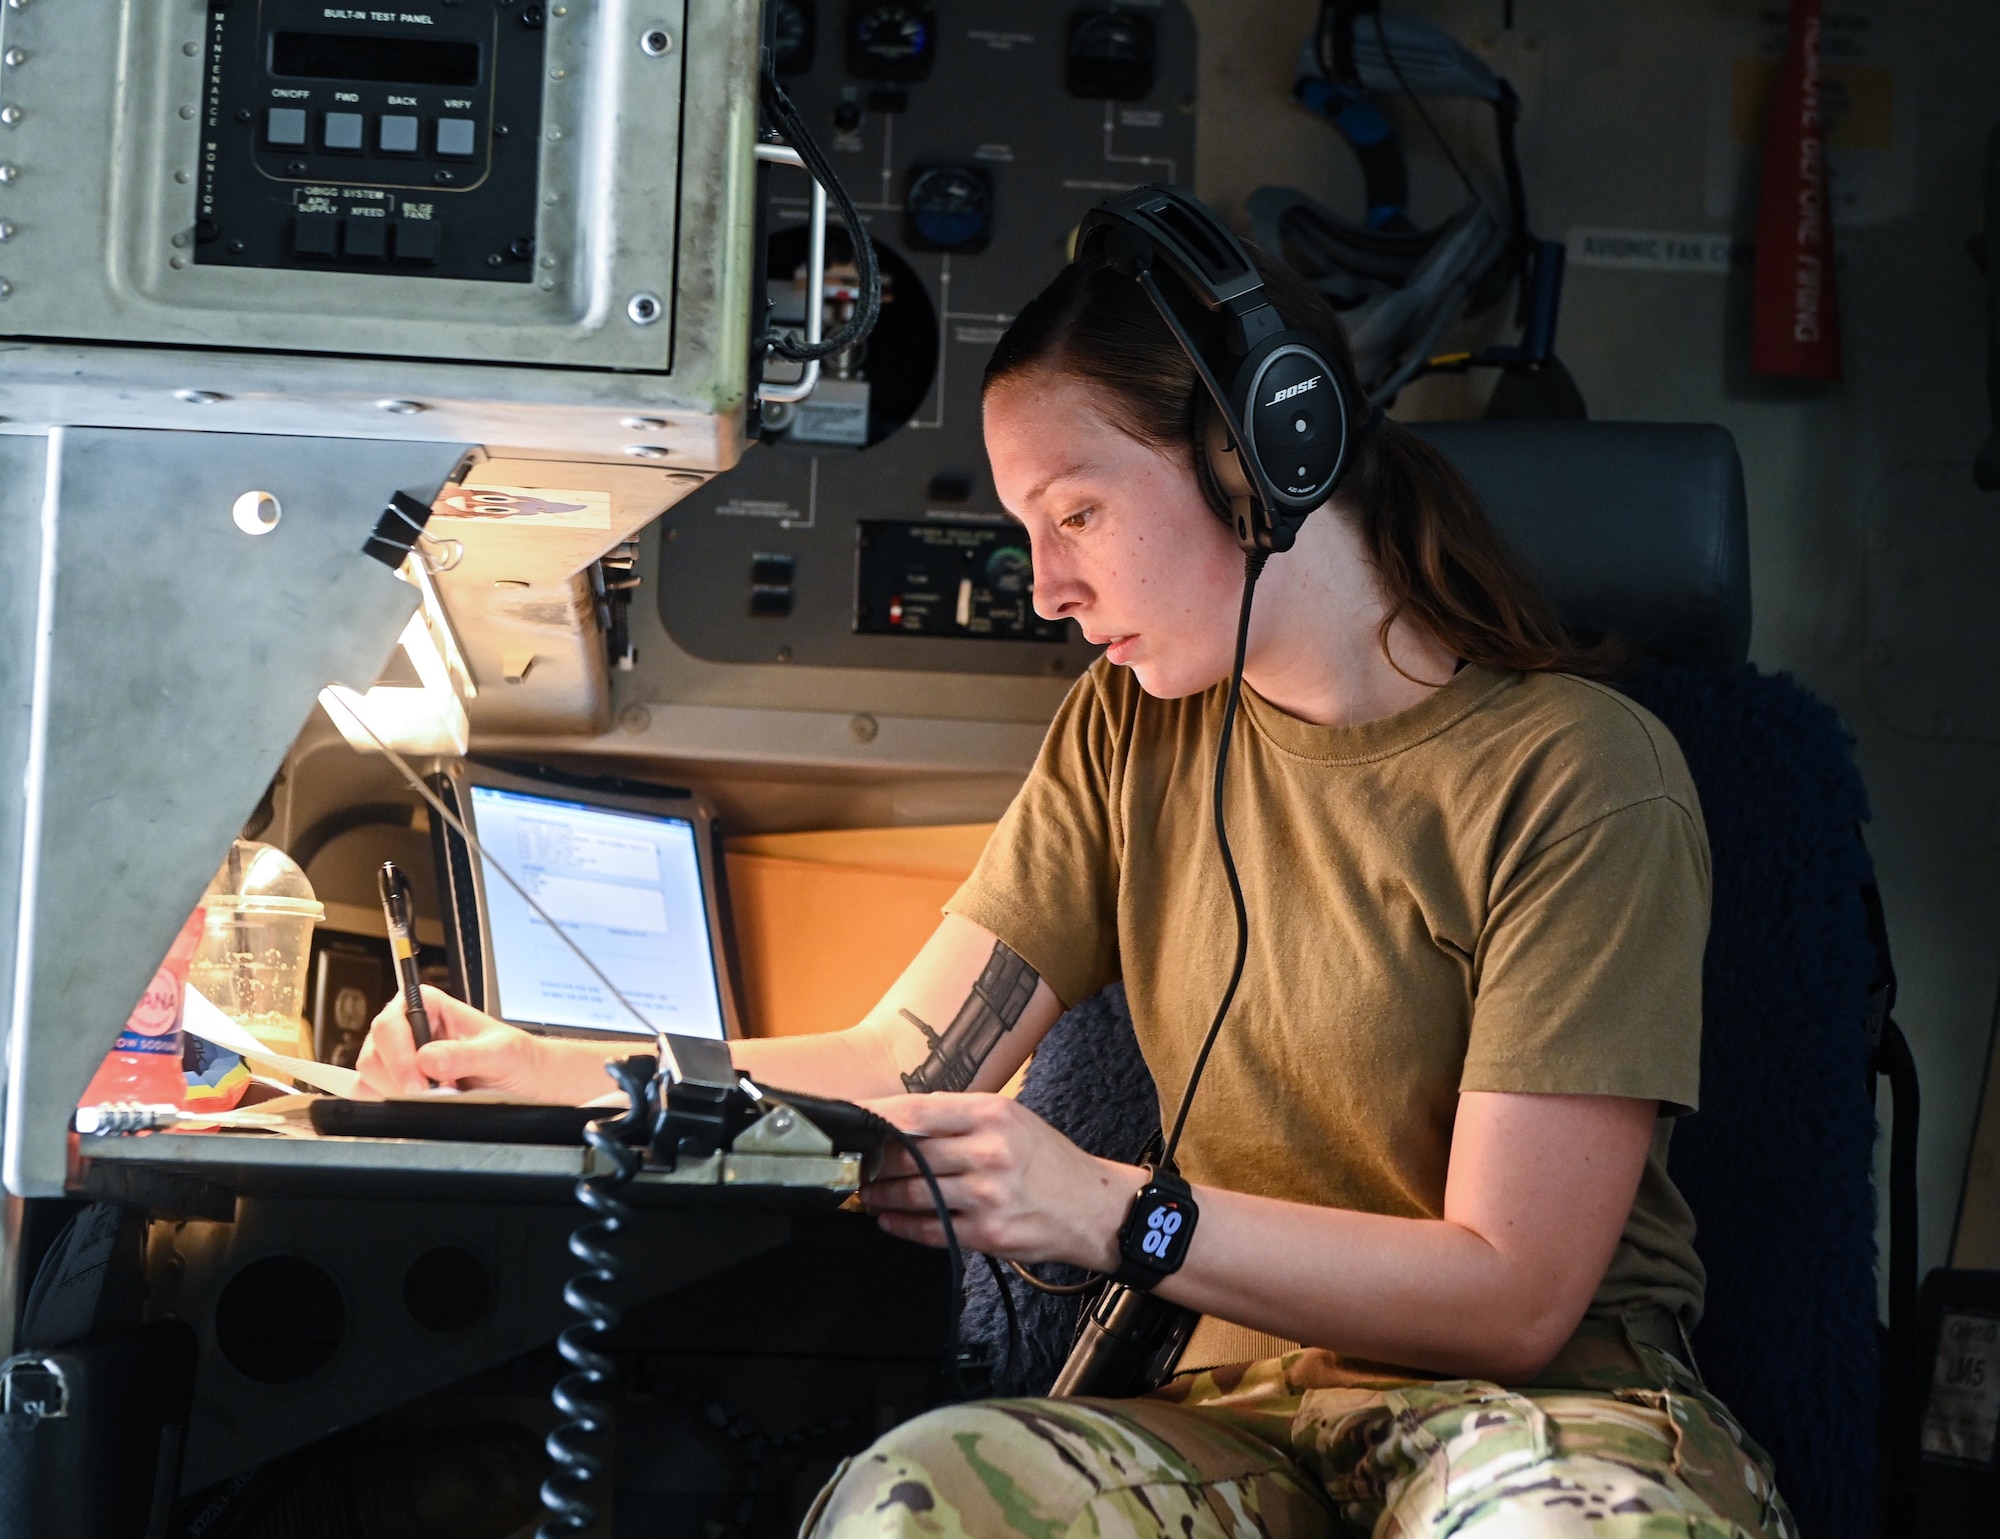 U.S. Air Force Senior Airman Nicole Snowden, an 816th Expeditionary Airlift Squadron loadmaster, goes through a preflight checklist July 12, 2022 at Al Udeid Airbase, Qatar. Loadmasters are responsible for the on-load, securing and off-load of any cargo on board an aircraft, as well as any passengers who may be flying. (U.S. Air National Guard photo by Tech. Sgt. Michael J. Kelly)